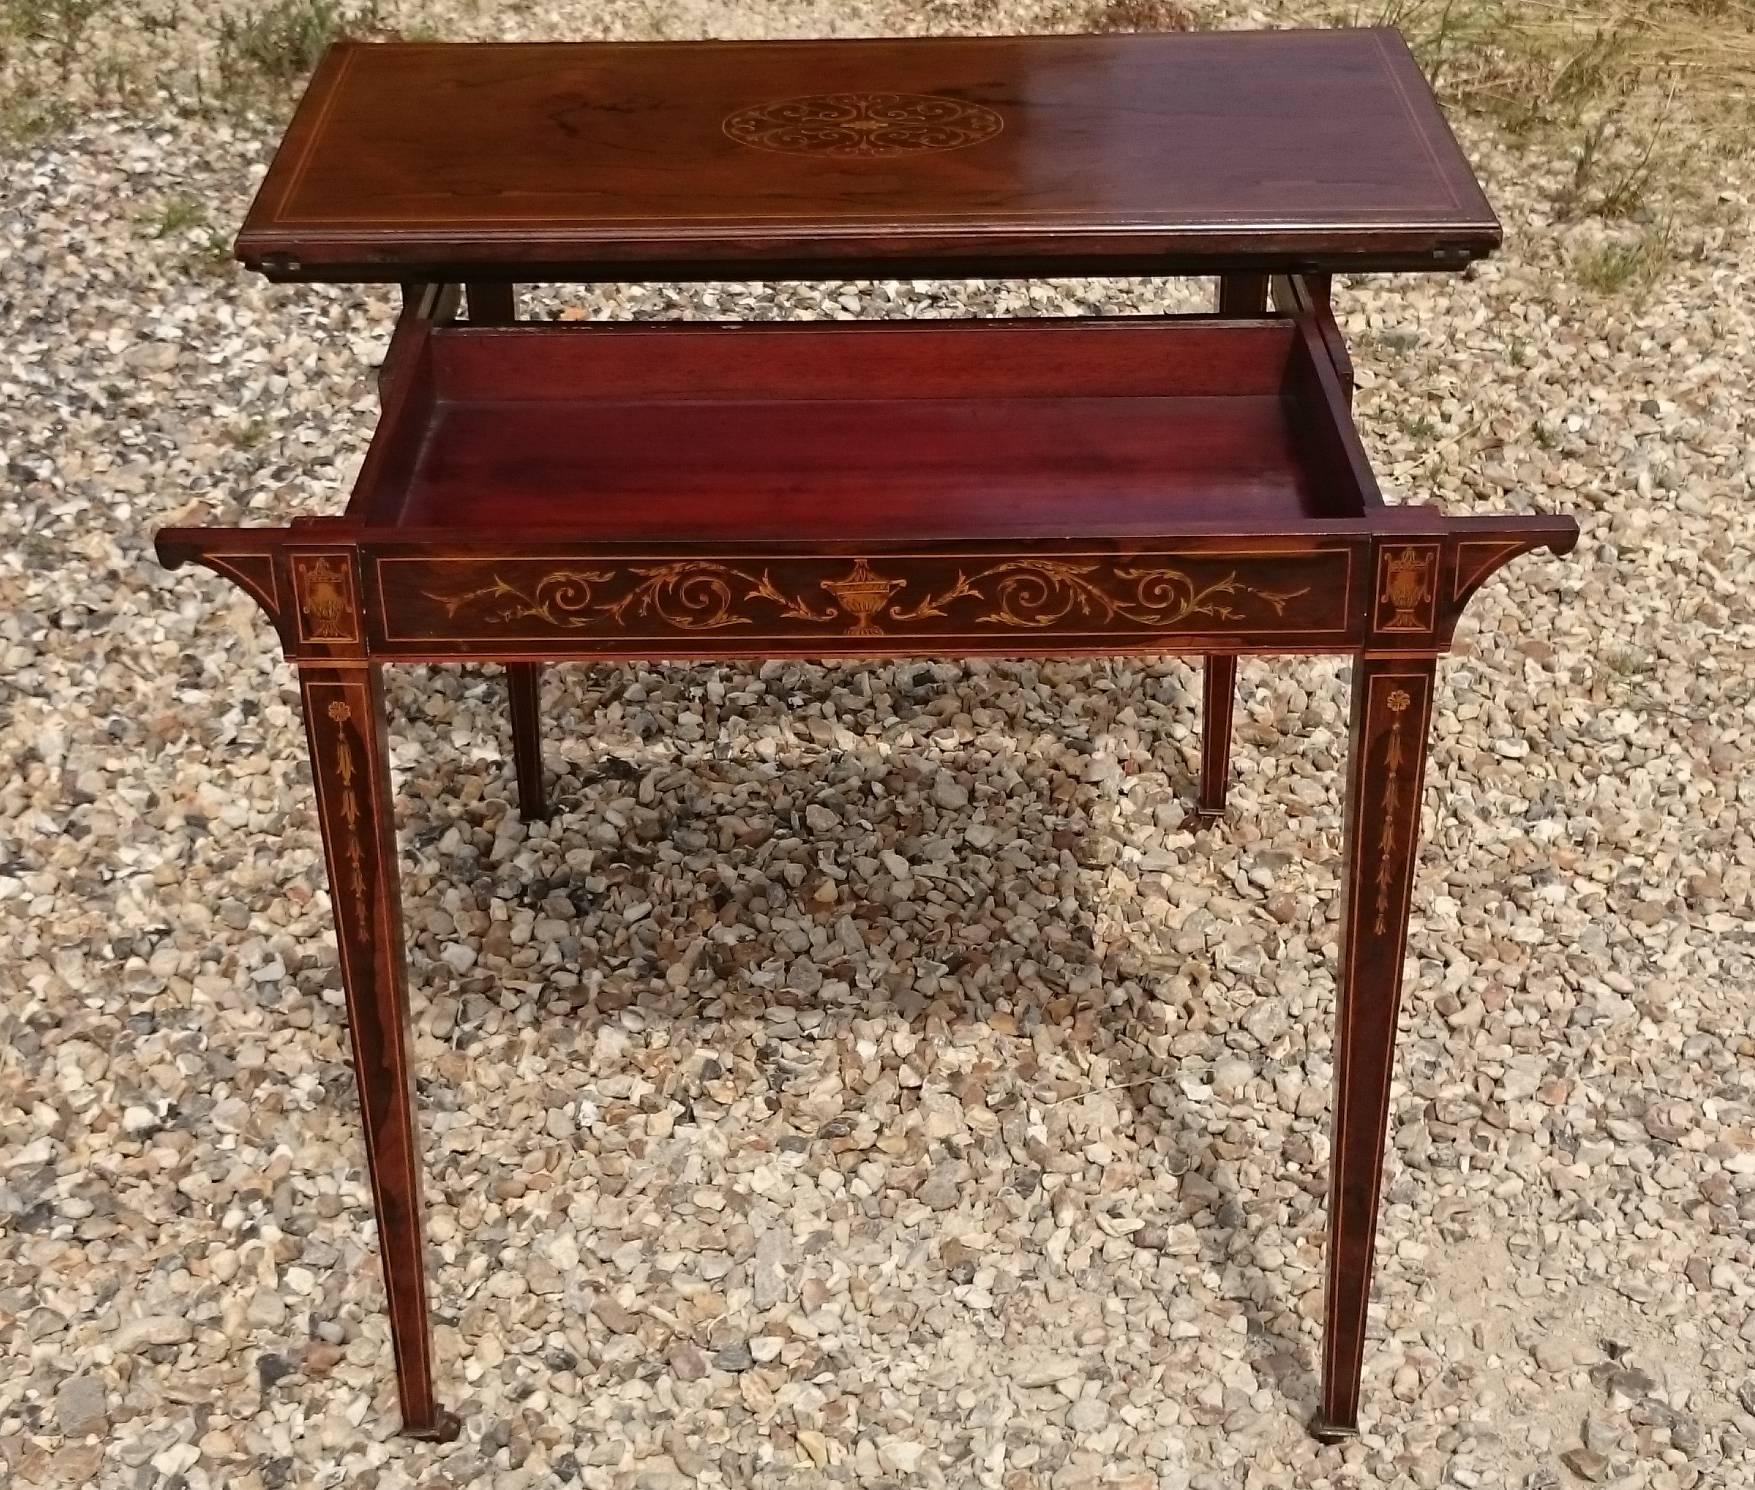 Early 20th Century Antique Card Table with Fine Inlaid Decoration 1